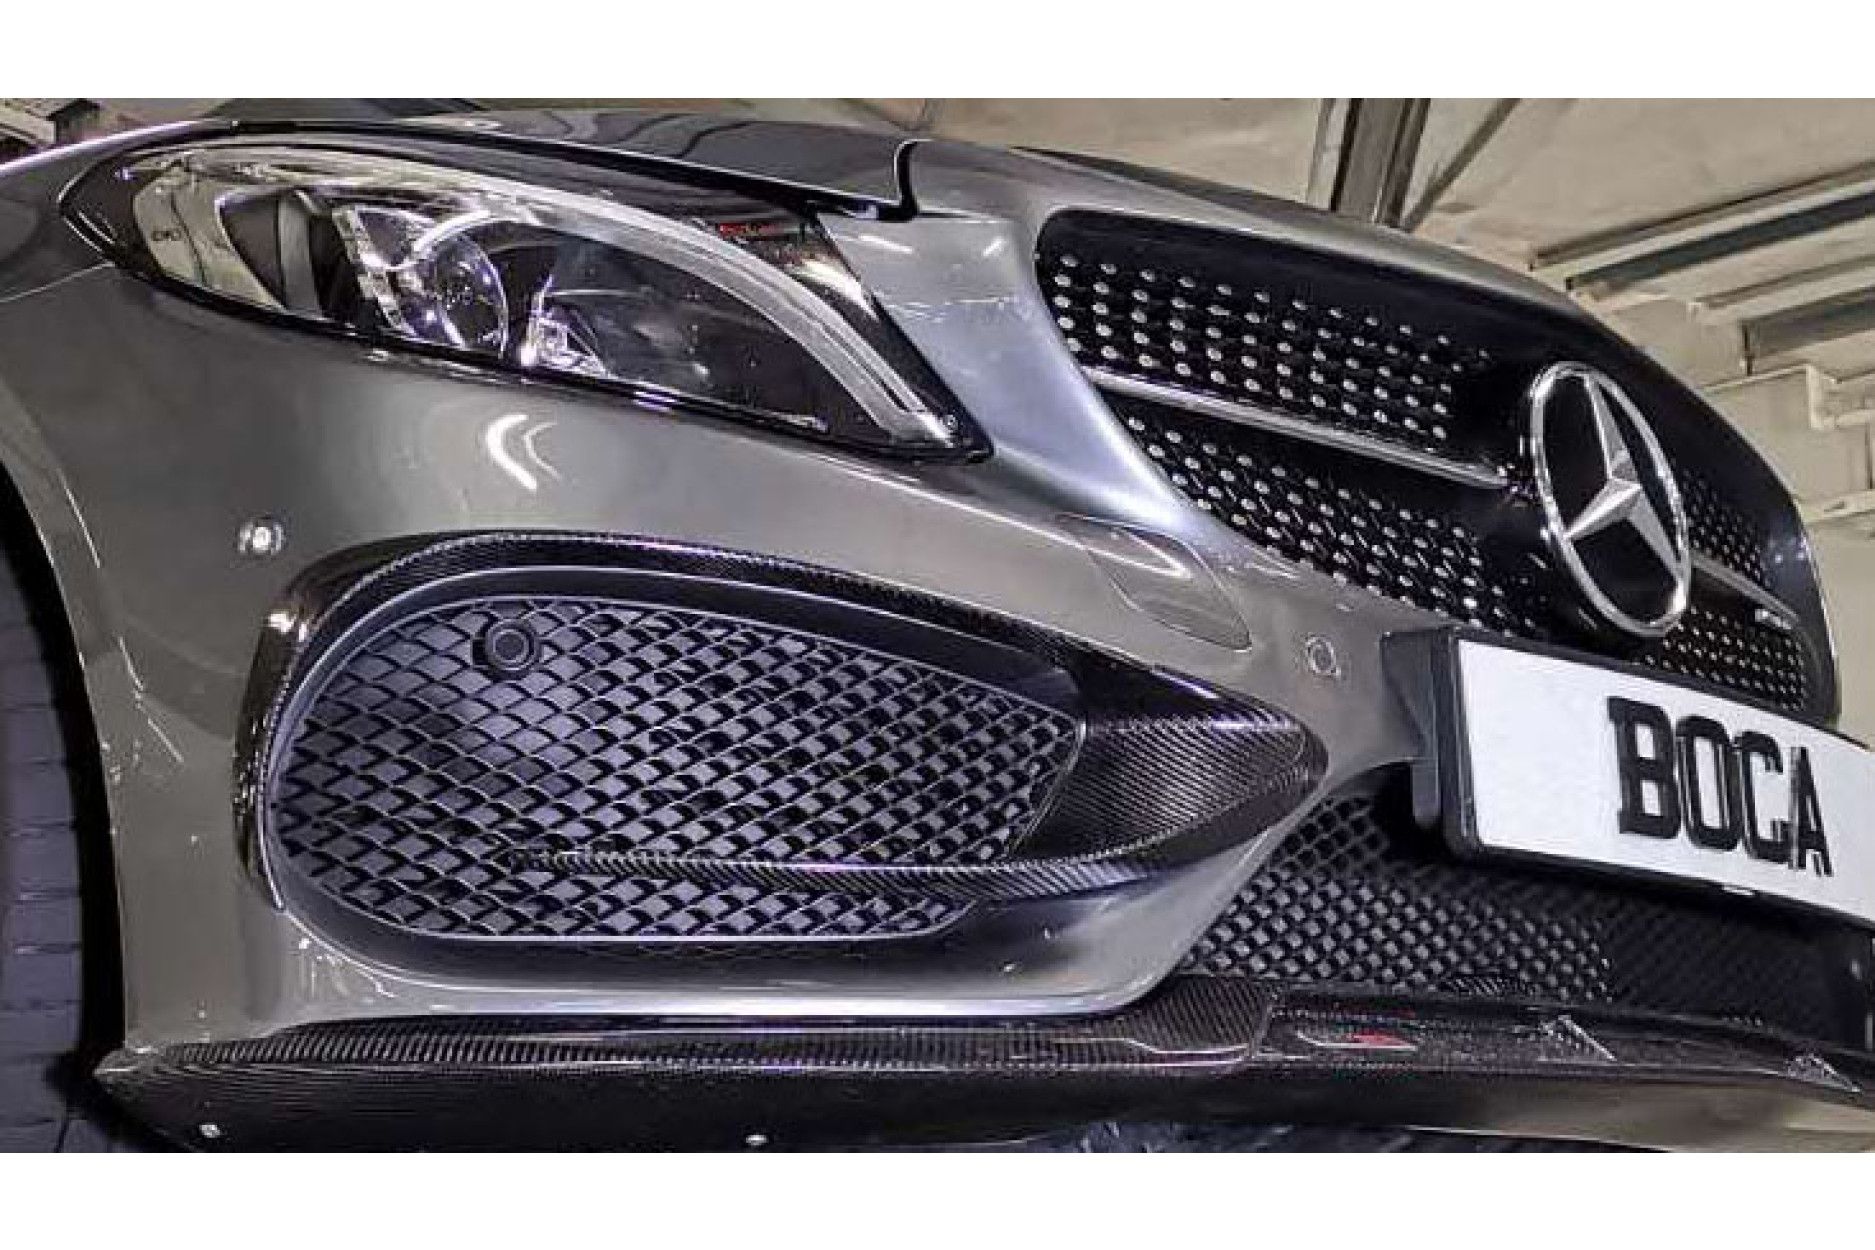 Boca Carbon front insert Mercurie for Mercedes W205|C205 C200|C250|C300 AMG-package and C43 AMG sedan|Coupe (3) 